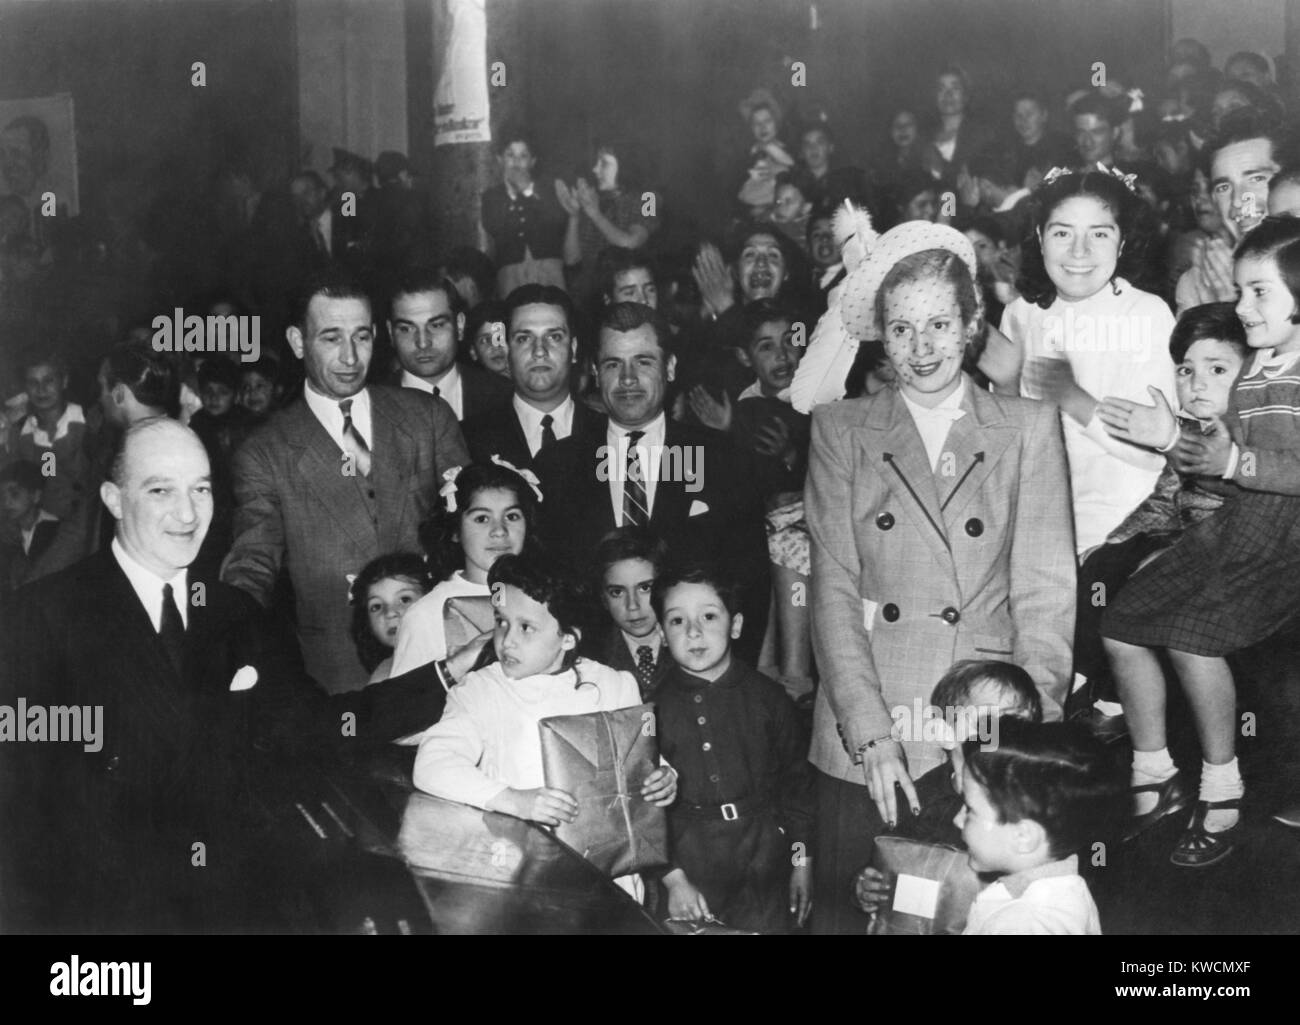 First Lady Eva Peron, distributing gifts to children at the Eva Peron Foundation. With this organization, founded on July 8, 1948, she displaced the society women who previously ran Argentine charitable organizations. - (BSLOC_2014_14_23) Stock Photo